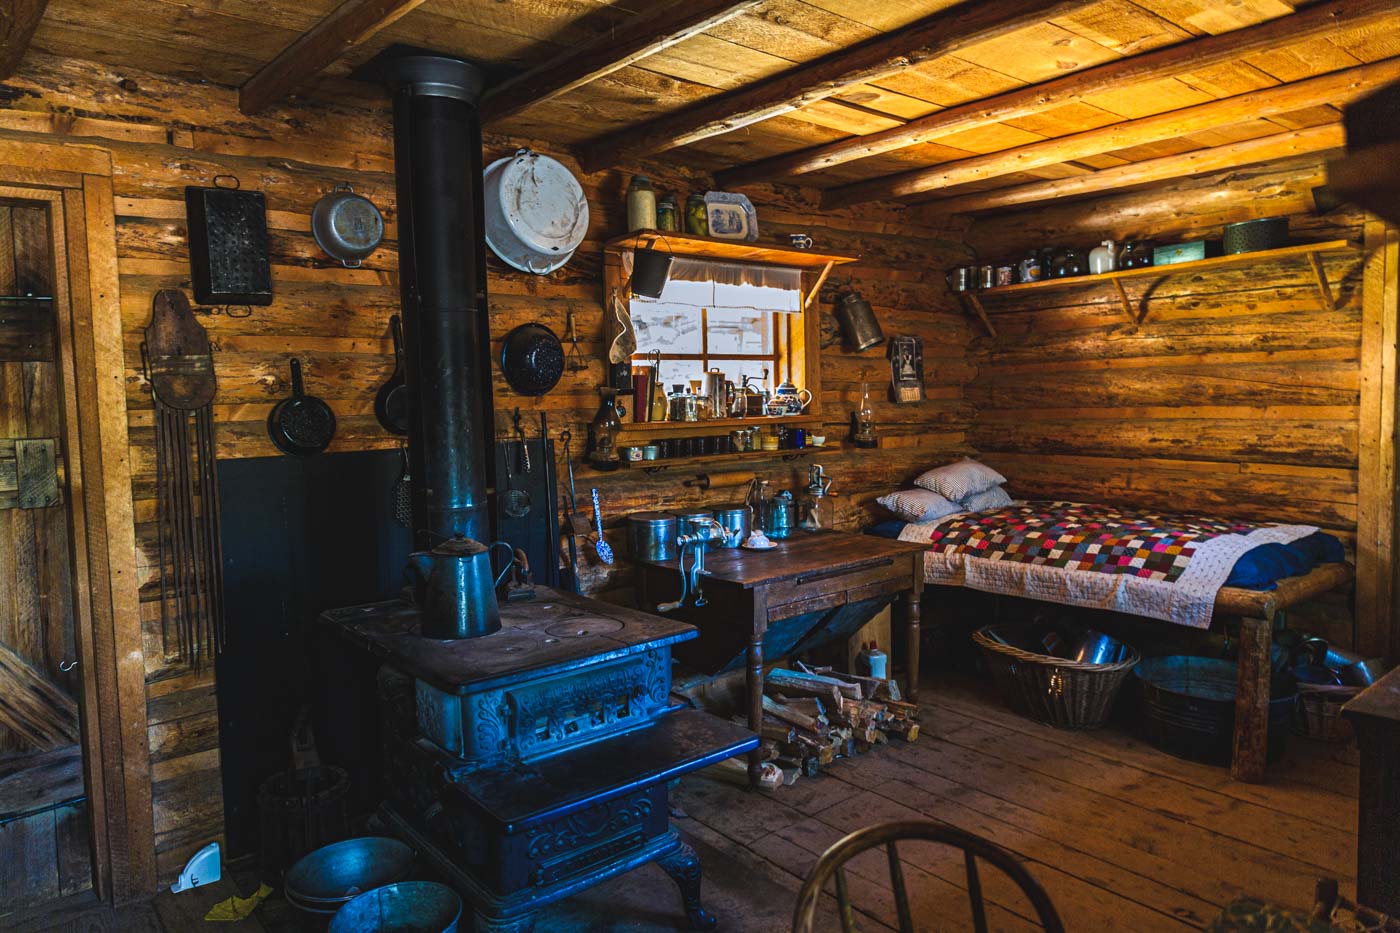 Cosy and traditional interior of a log cabin at the High Desert Museum in Bend.